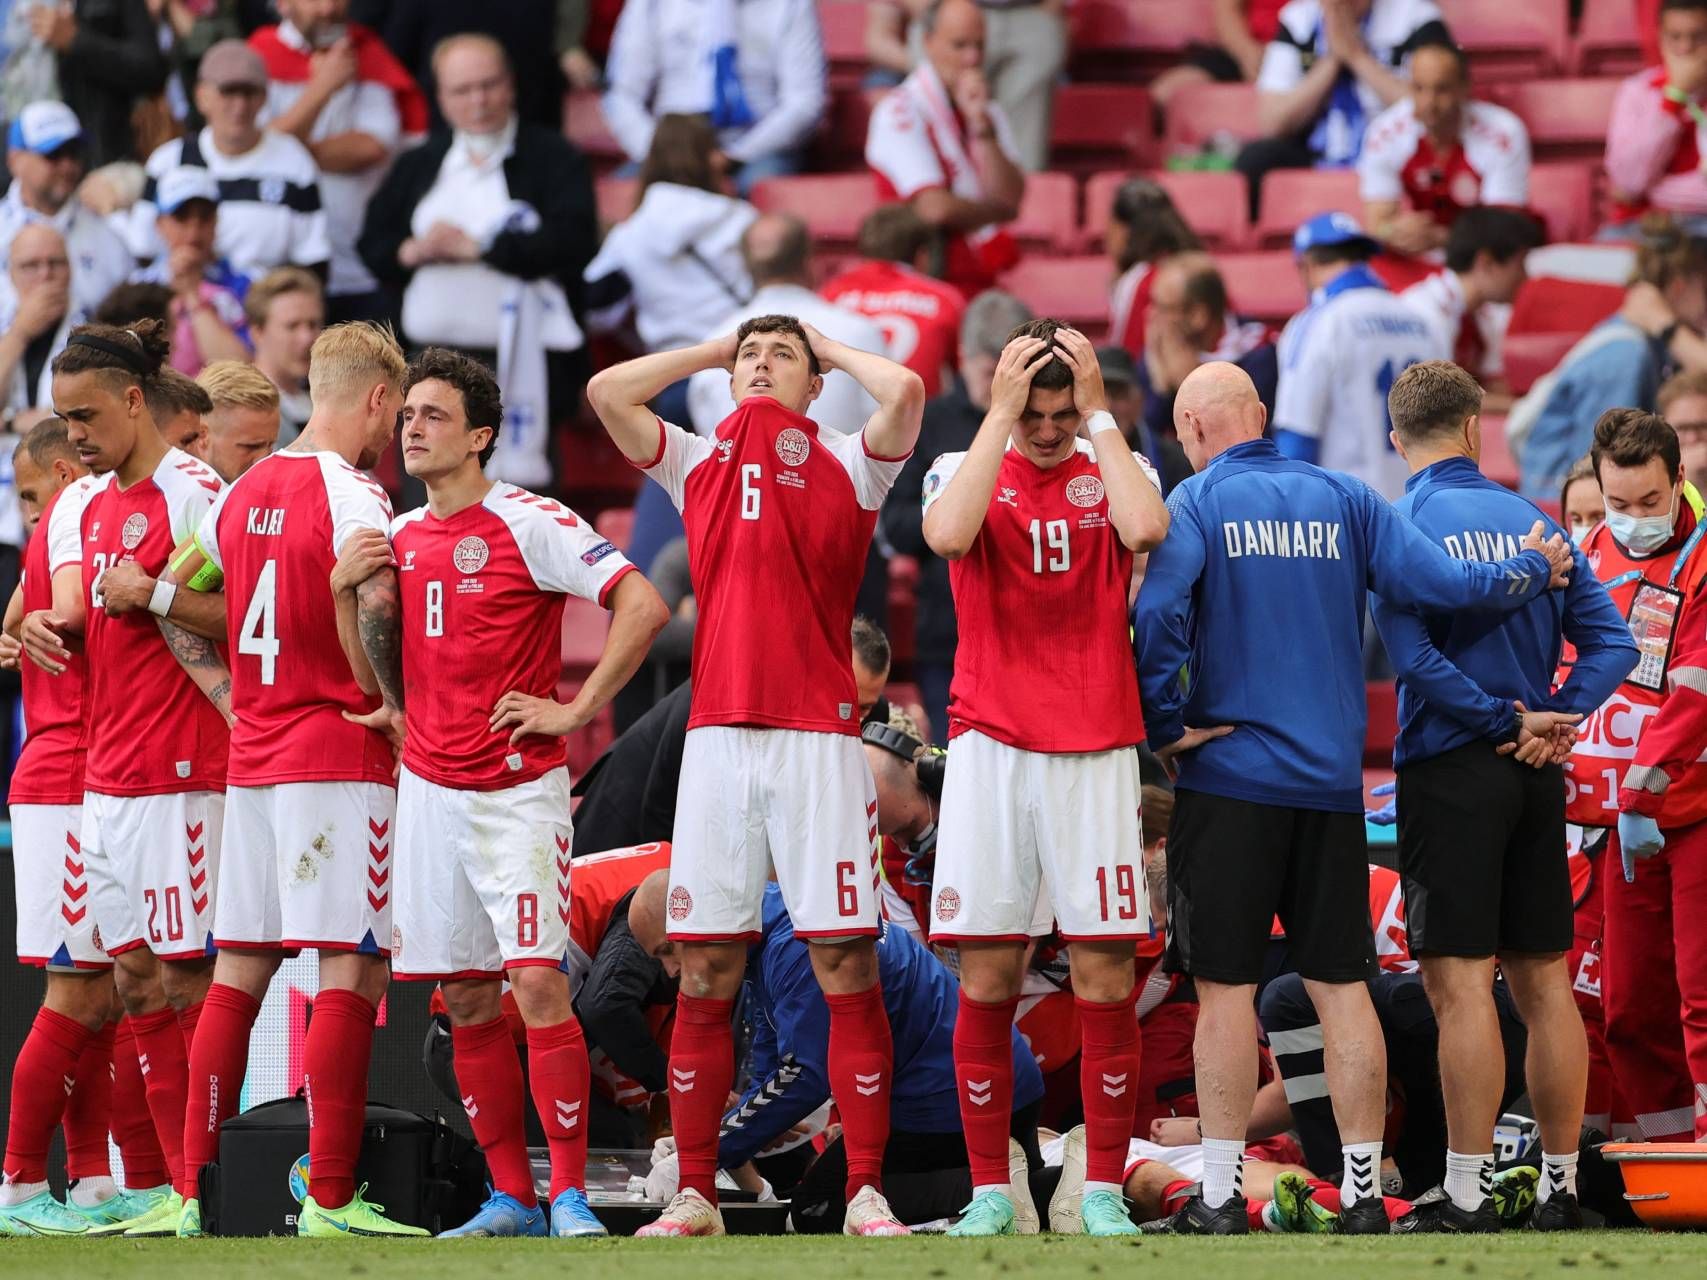 Denmark's players react as paramedics attend to Denmark's midfielder Christian Eriksen after he collapsed on the pitch during the UEFA EURO 2020 Group B football match between Denmark and Finland at the Parken Stadium in Copenhagen on June 12, 2021.